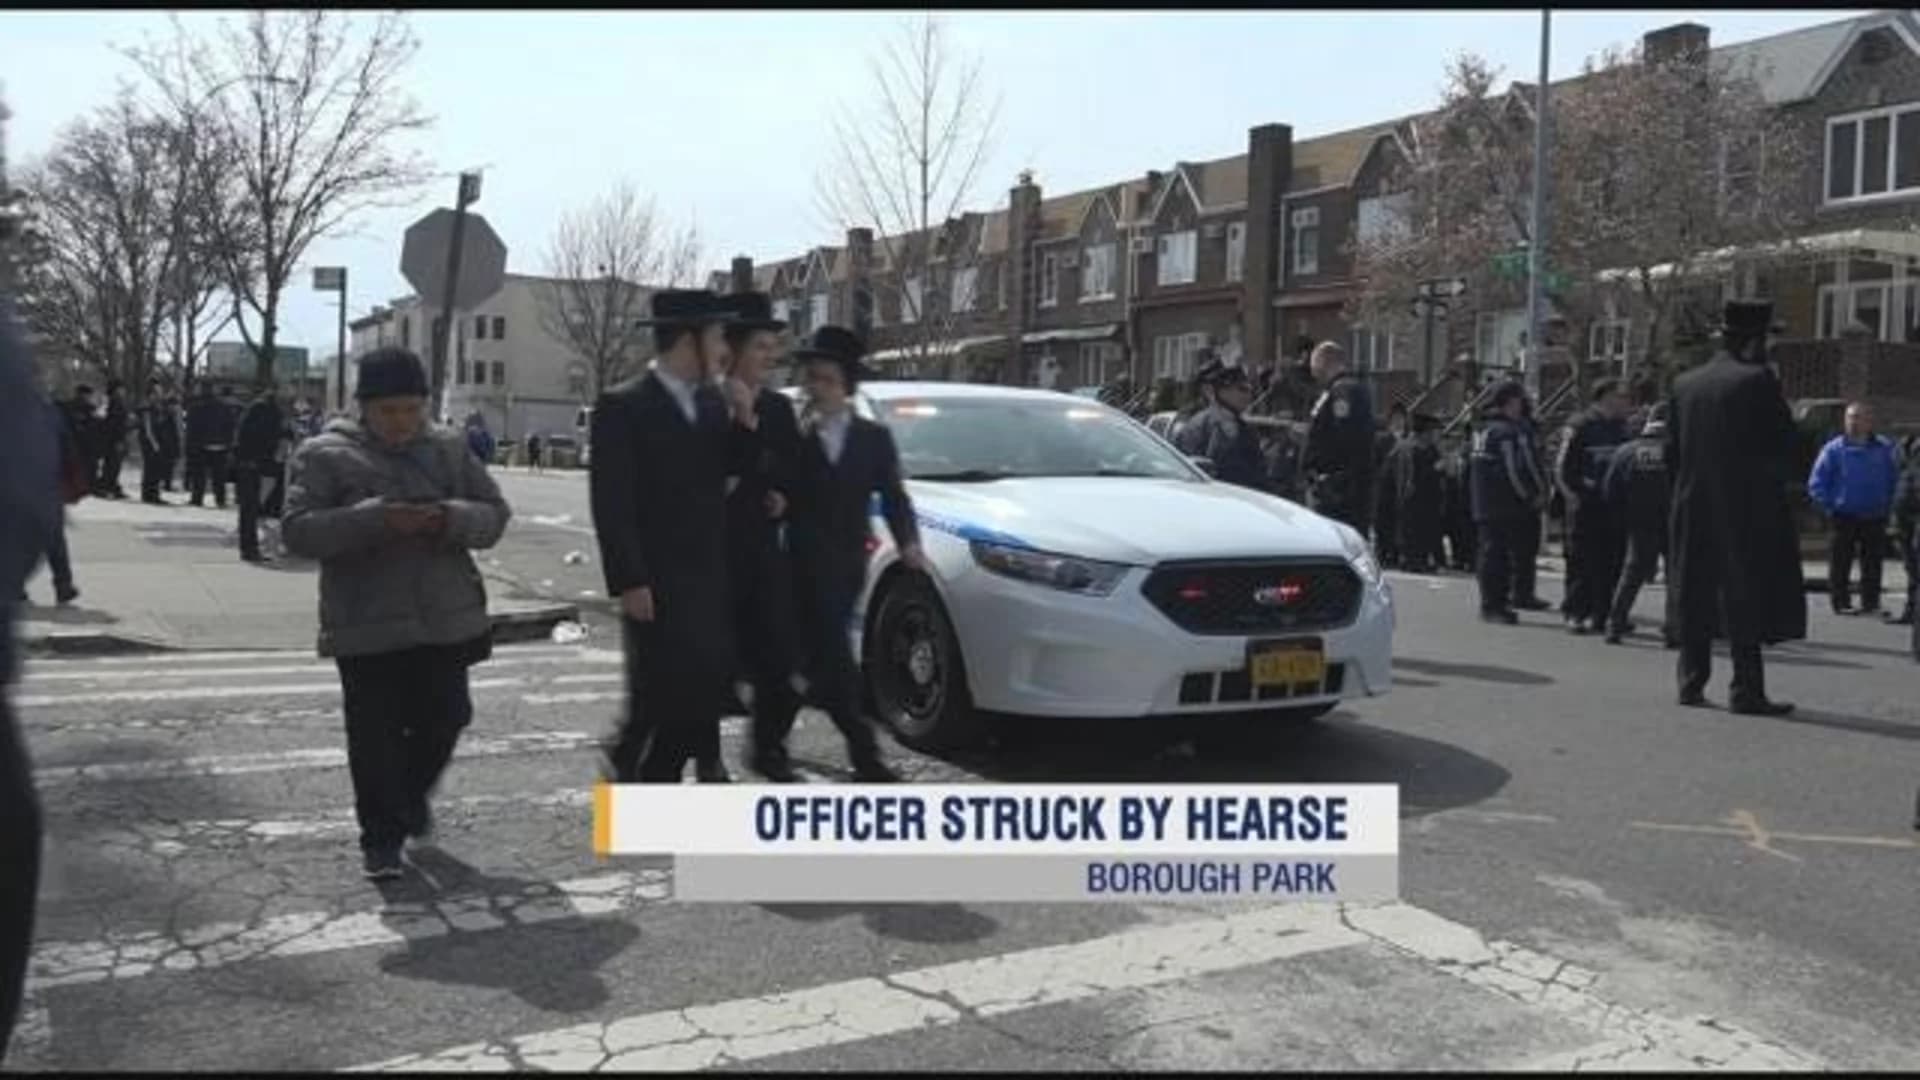 Hearse, drone injure officers at rabbi's funeral in Borough Park